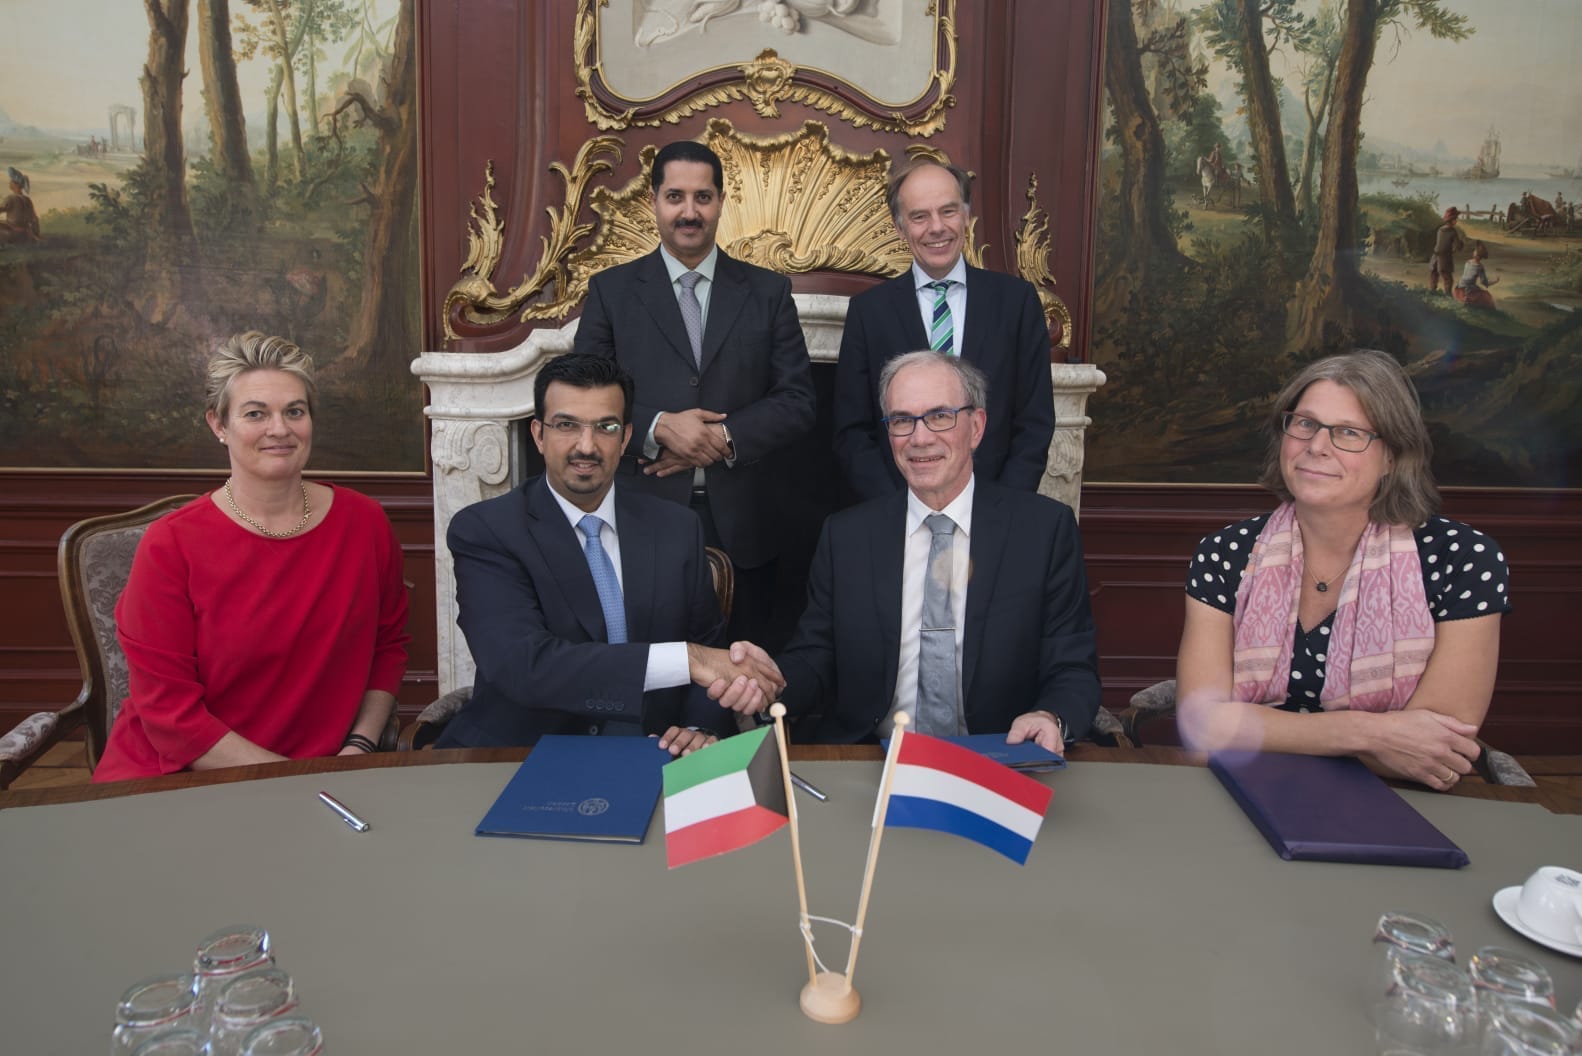 Kuwait's Abdulaziz Saud Al-Babtain Cultural Foundation opens a center specialized in Arab culture at Leiden University of the Netherlands